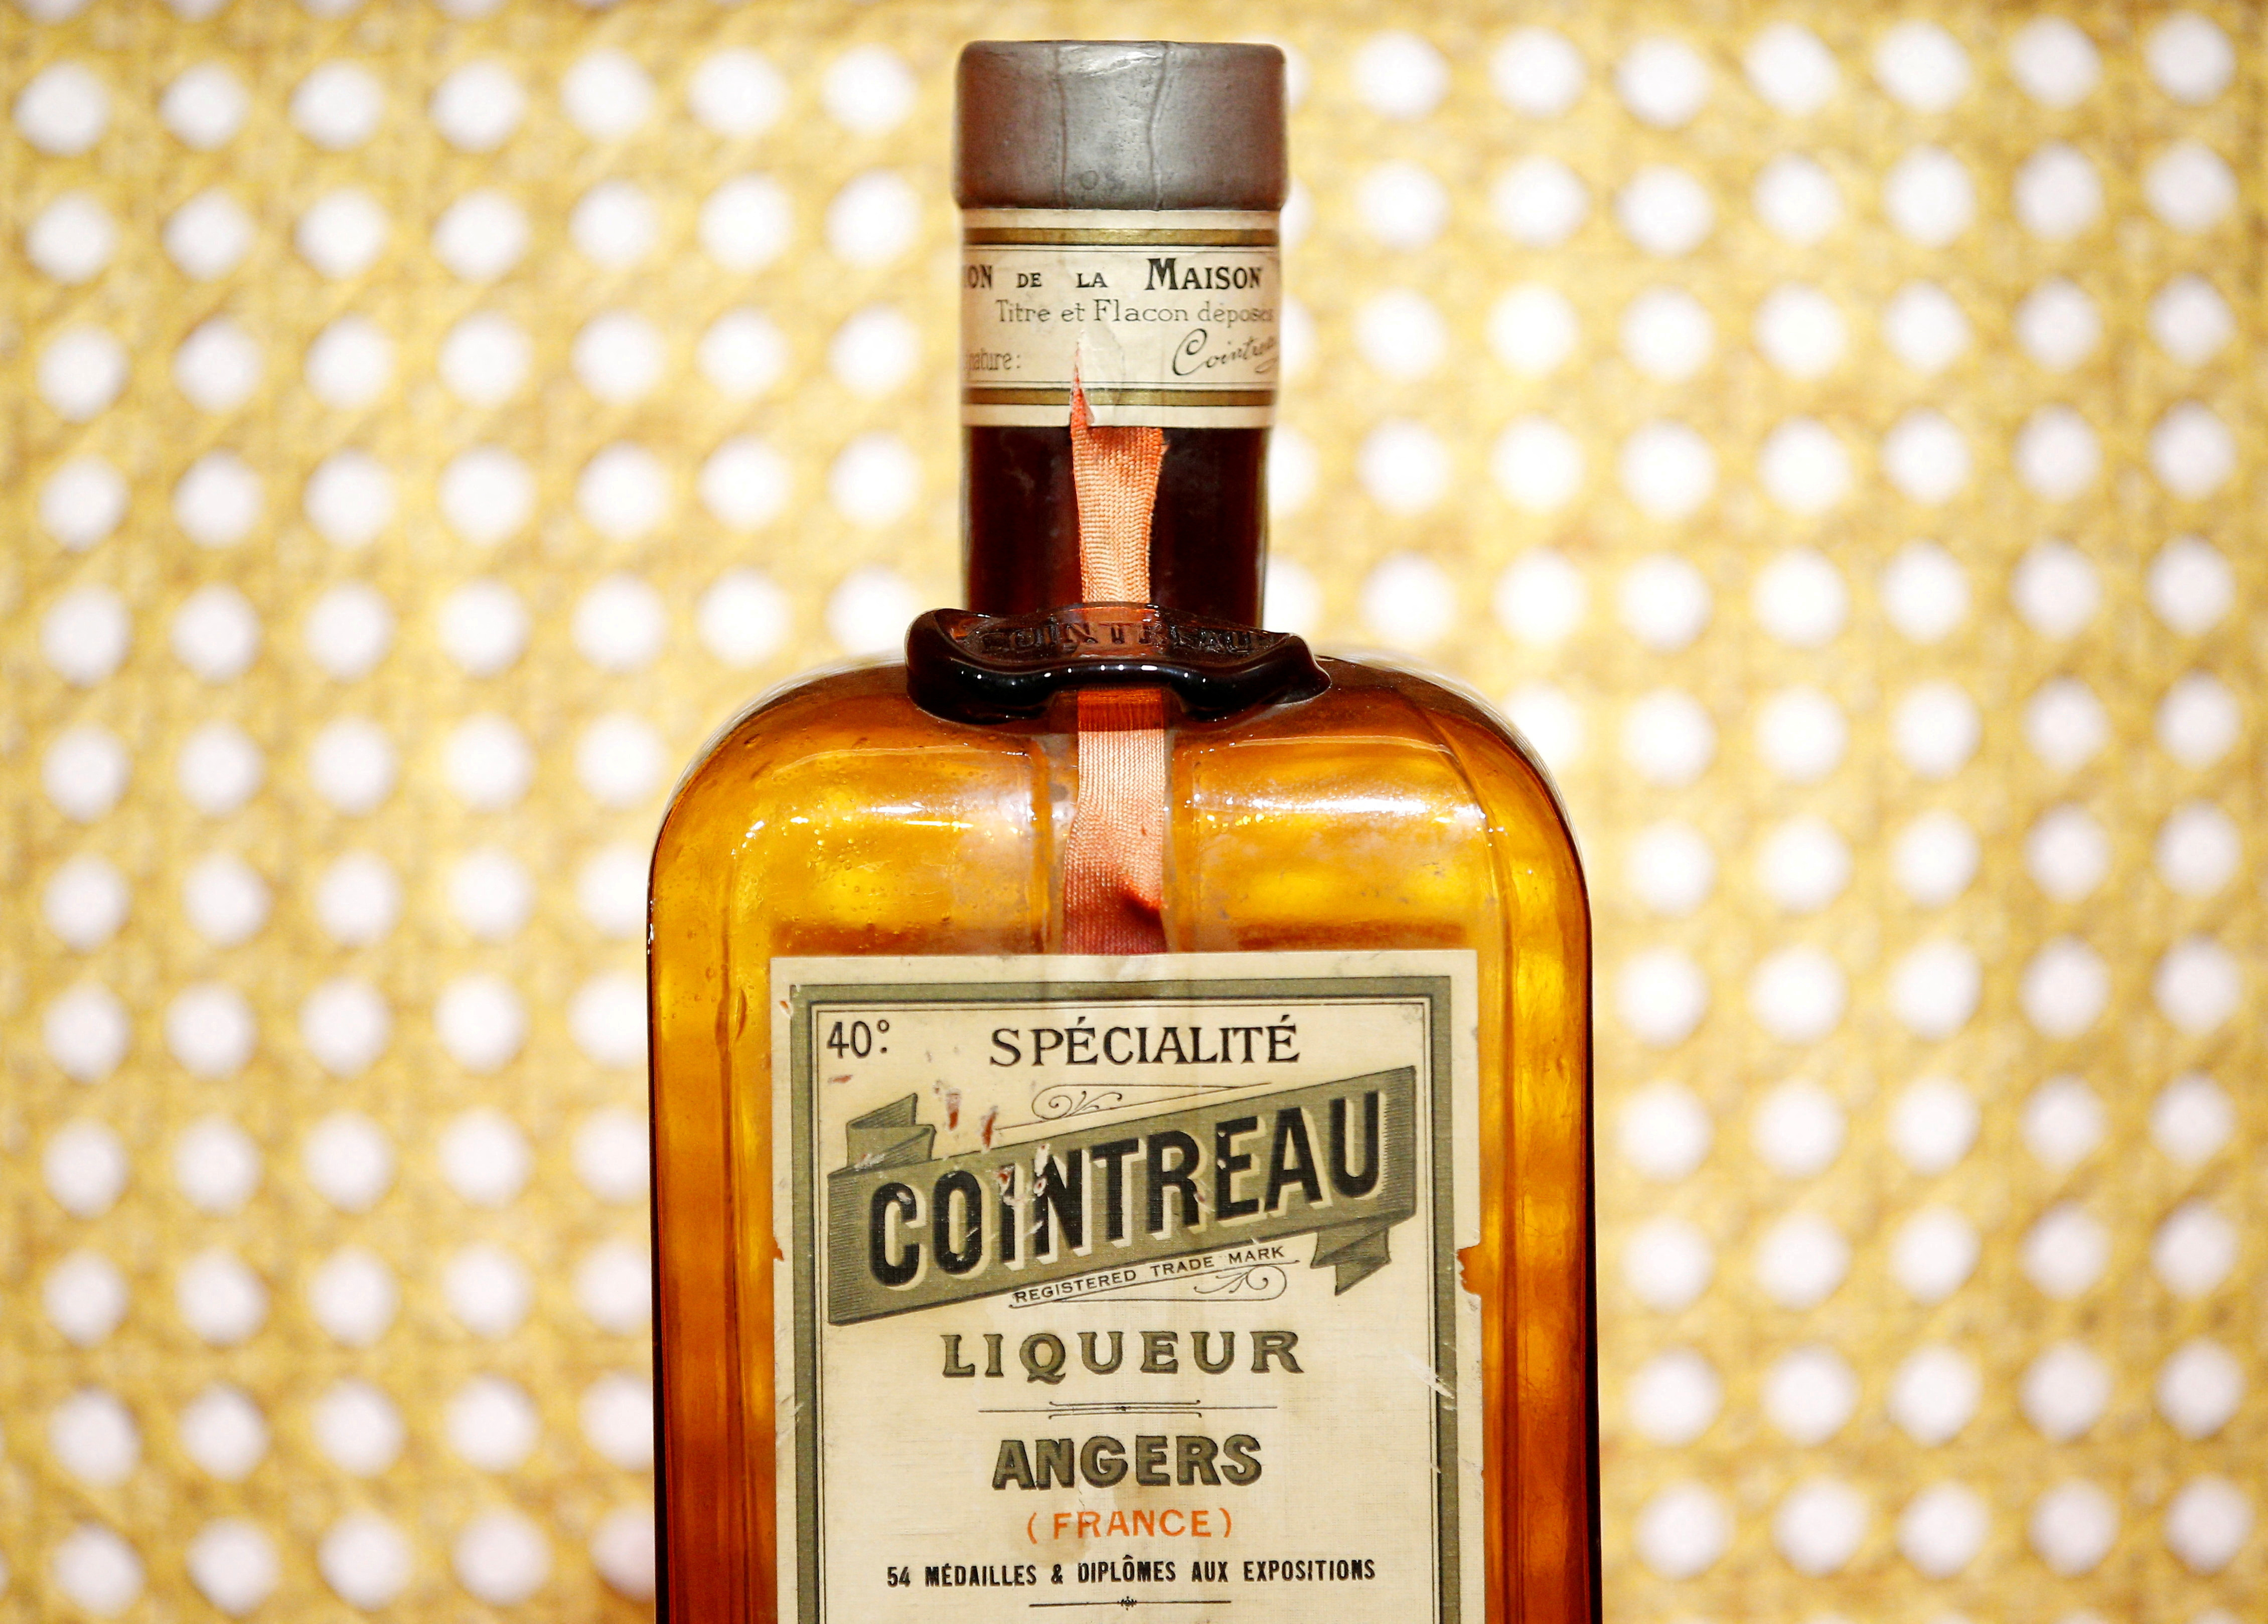 A bottle of Cointreau is displayed at the Carre Cointreau in the Cointreau distillery in Saint-Barthelemy-d'Anjou, France